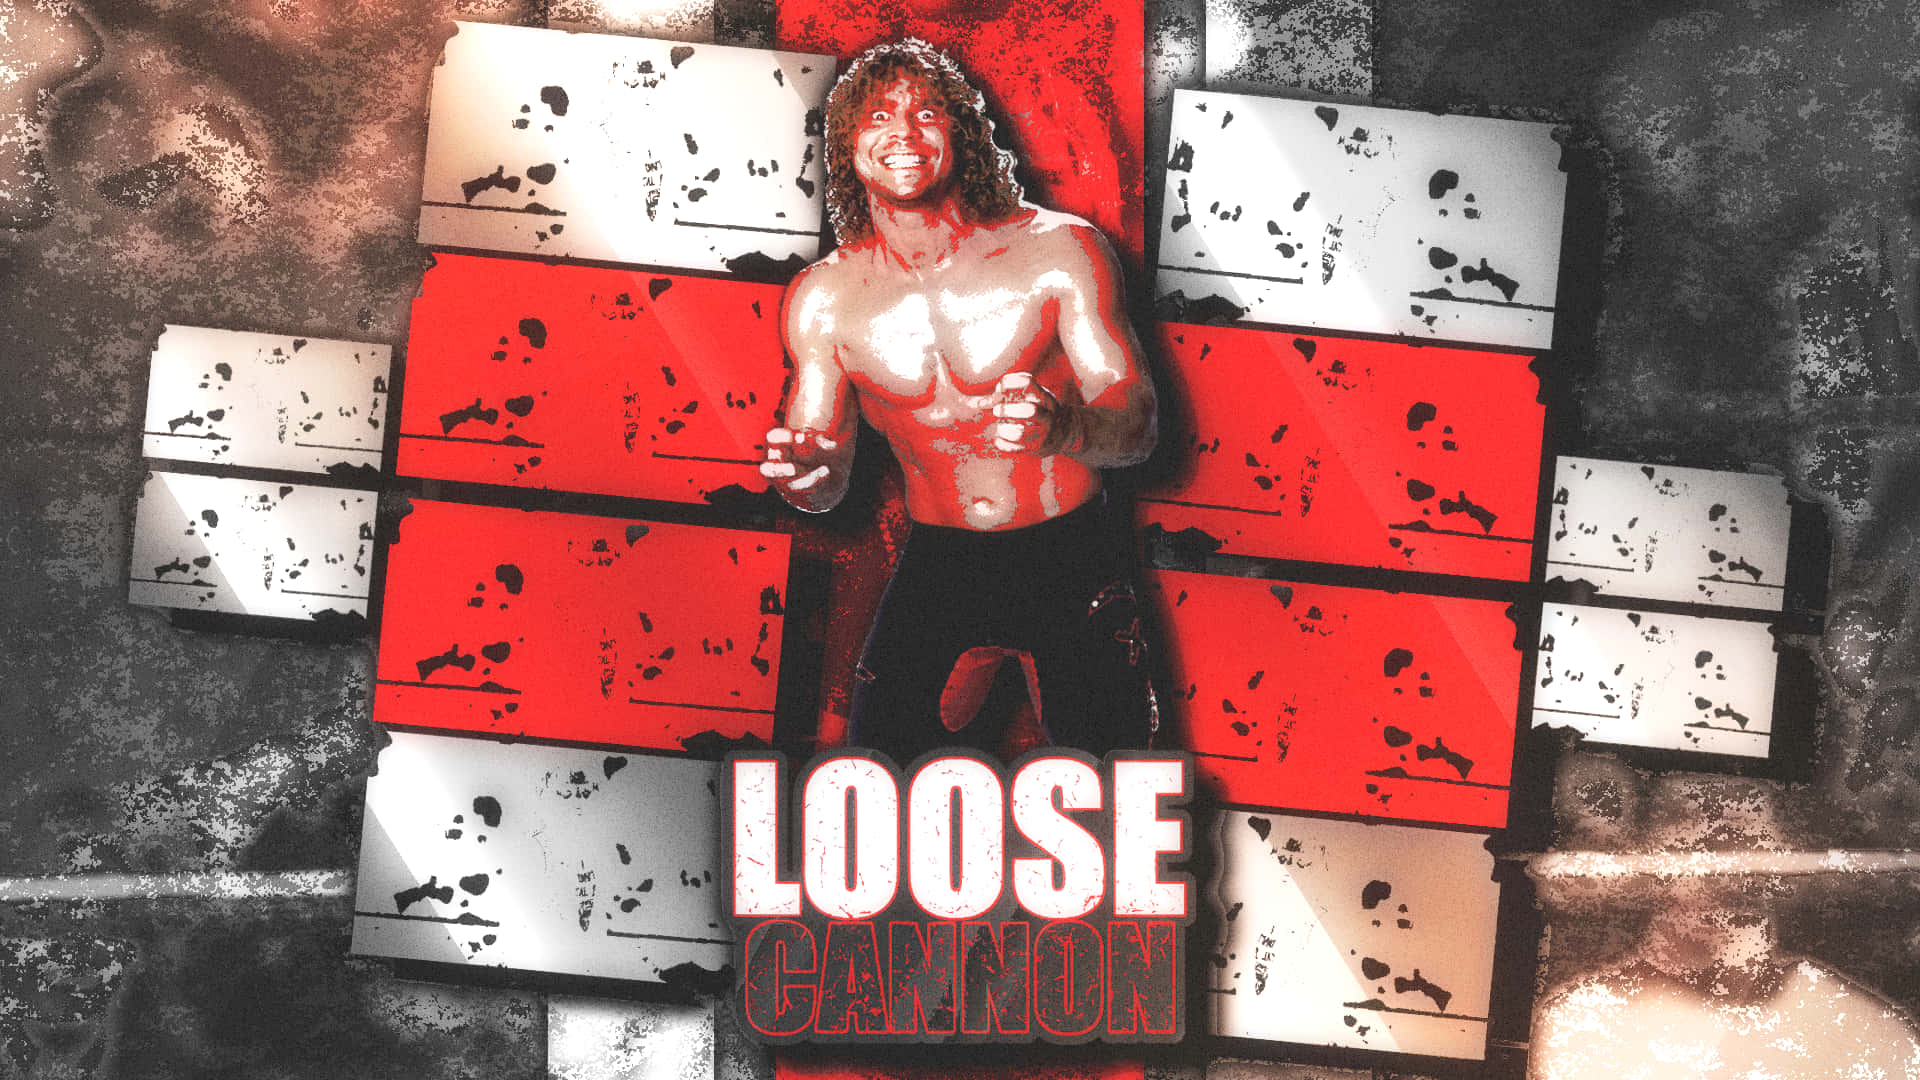 Legend of the ring, Brian Pillman in "Loose Cannon" movie. Wallpaper